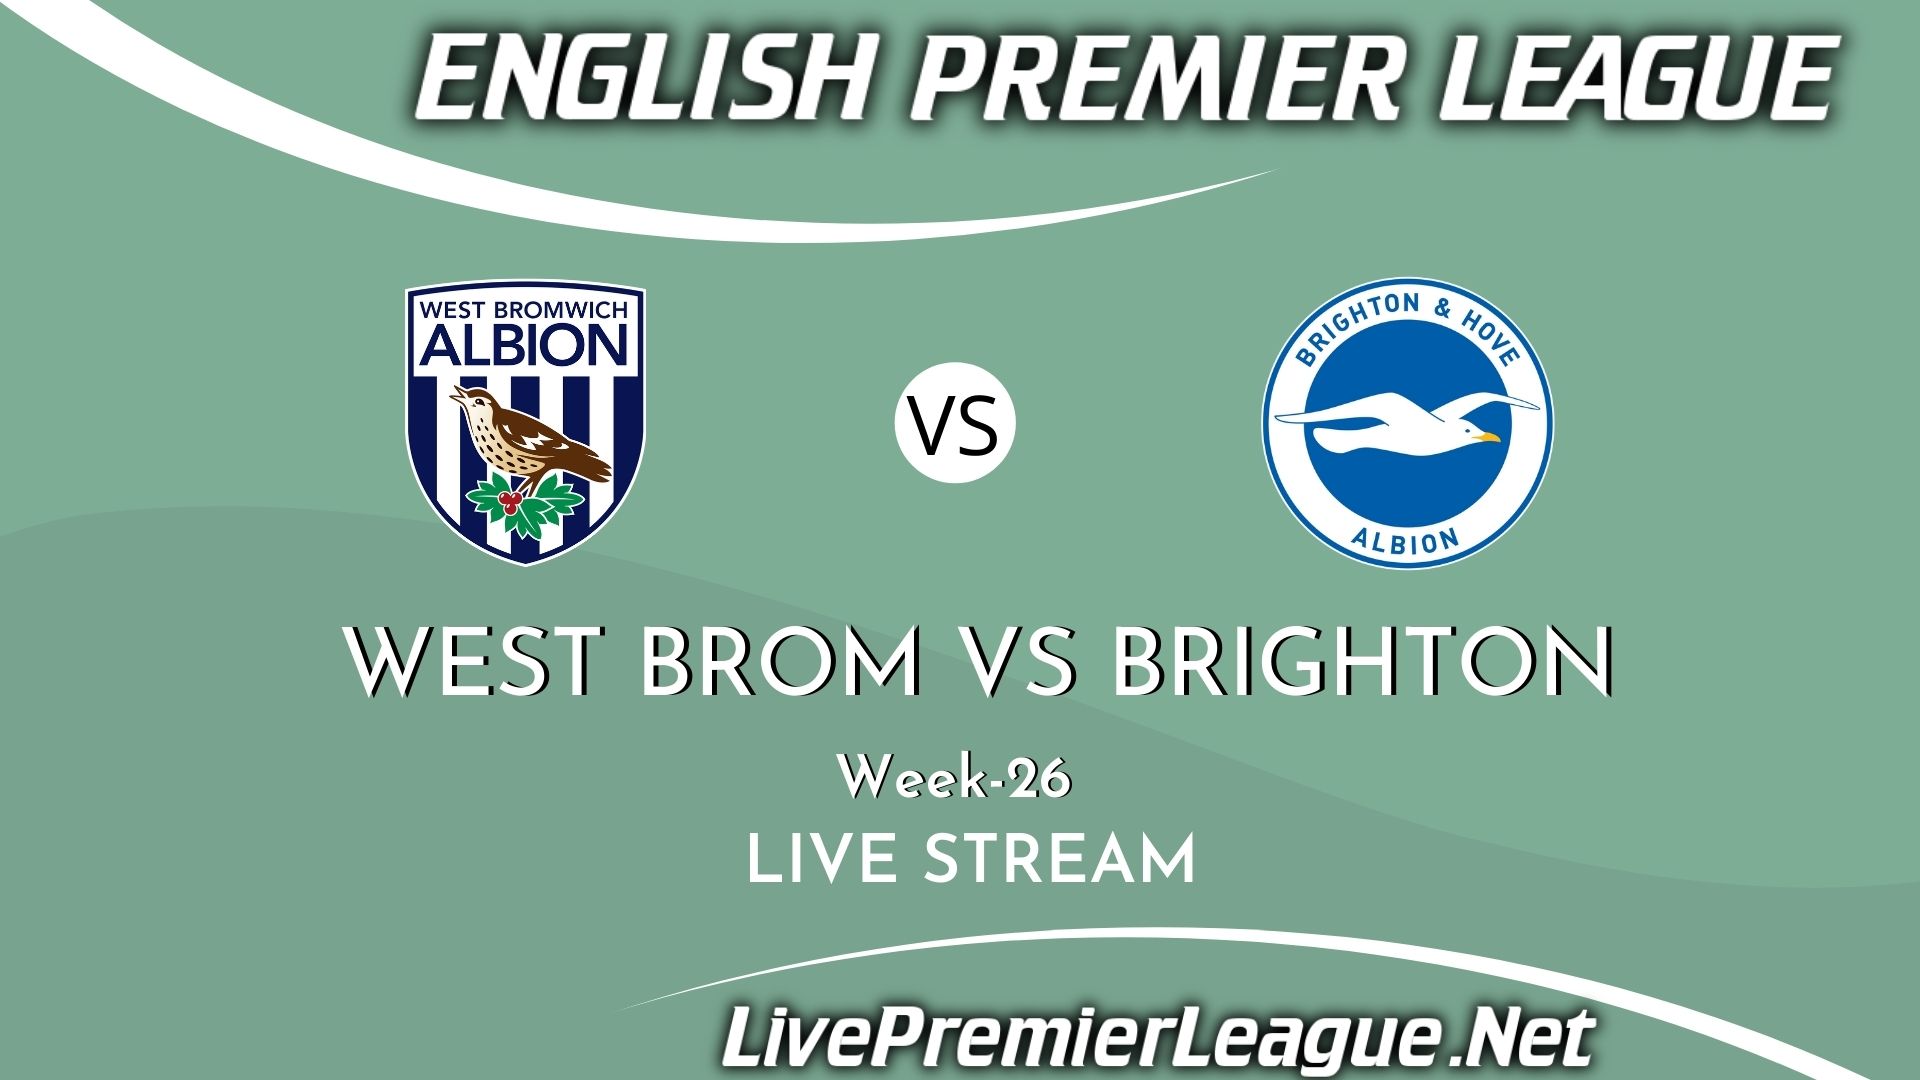 West Bromwich Albion Vs Brighton and Hove Albion Live Stream 2021 | Week 26